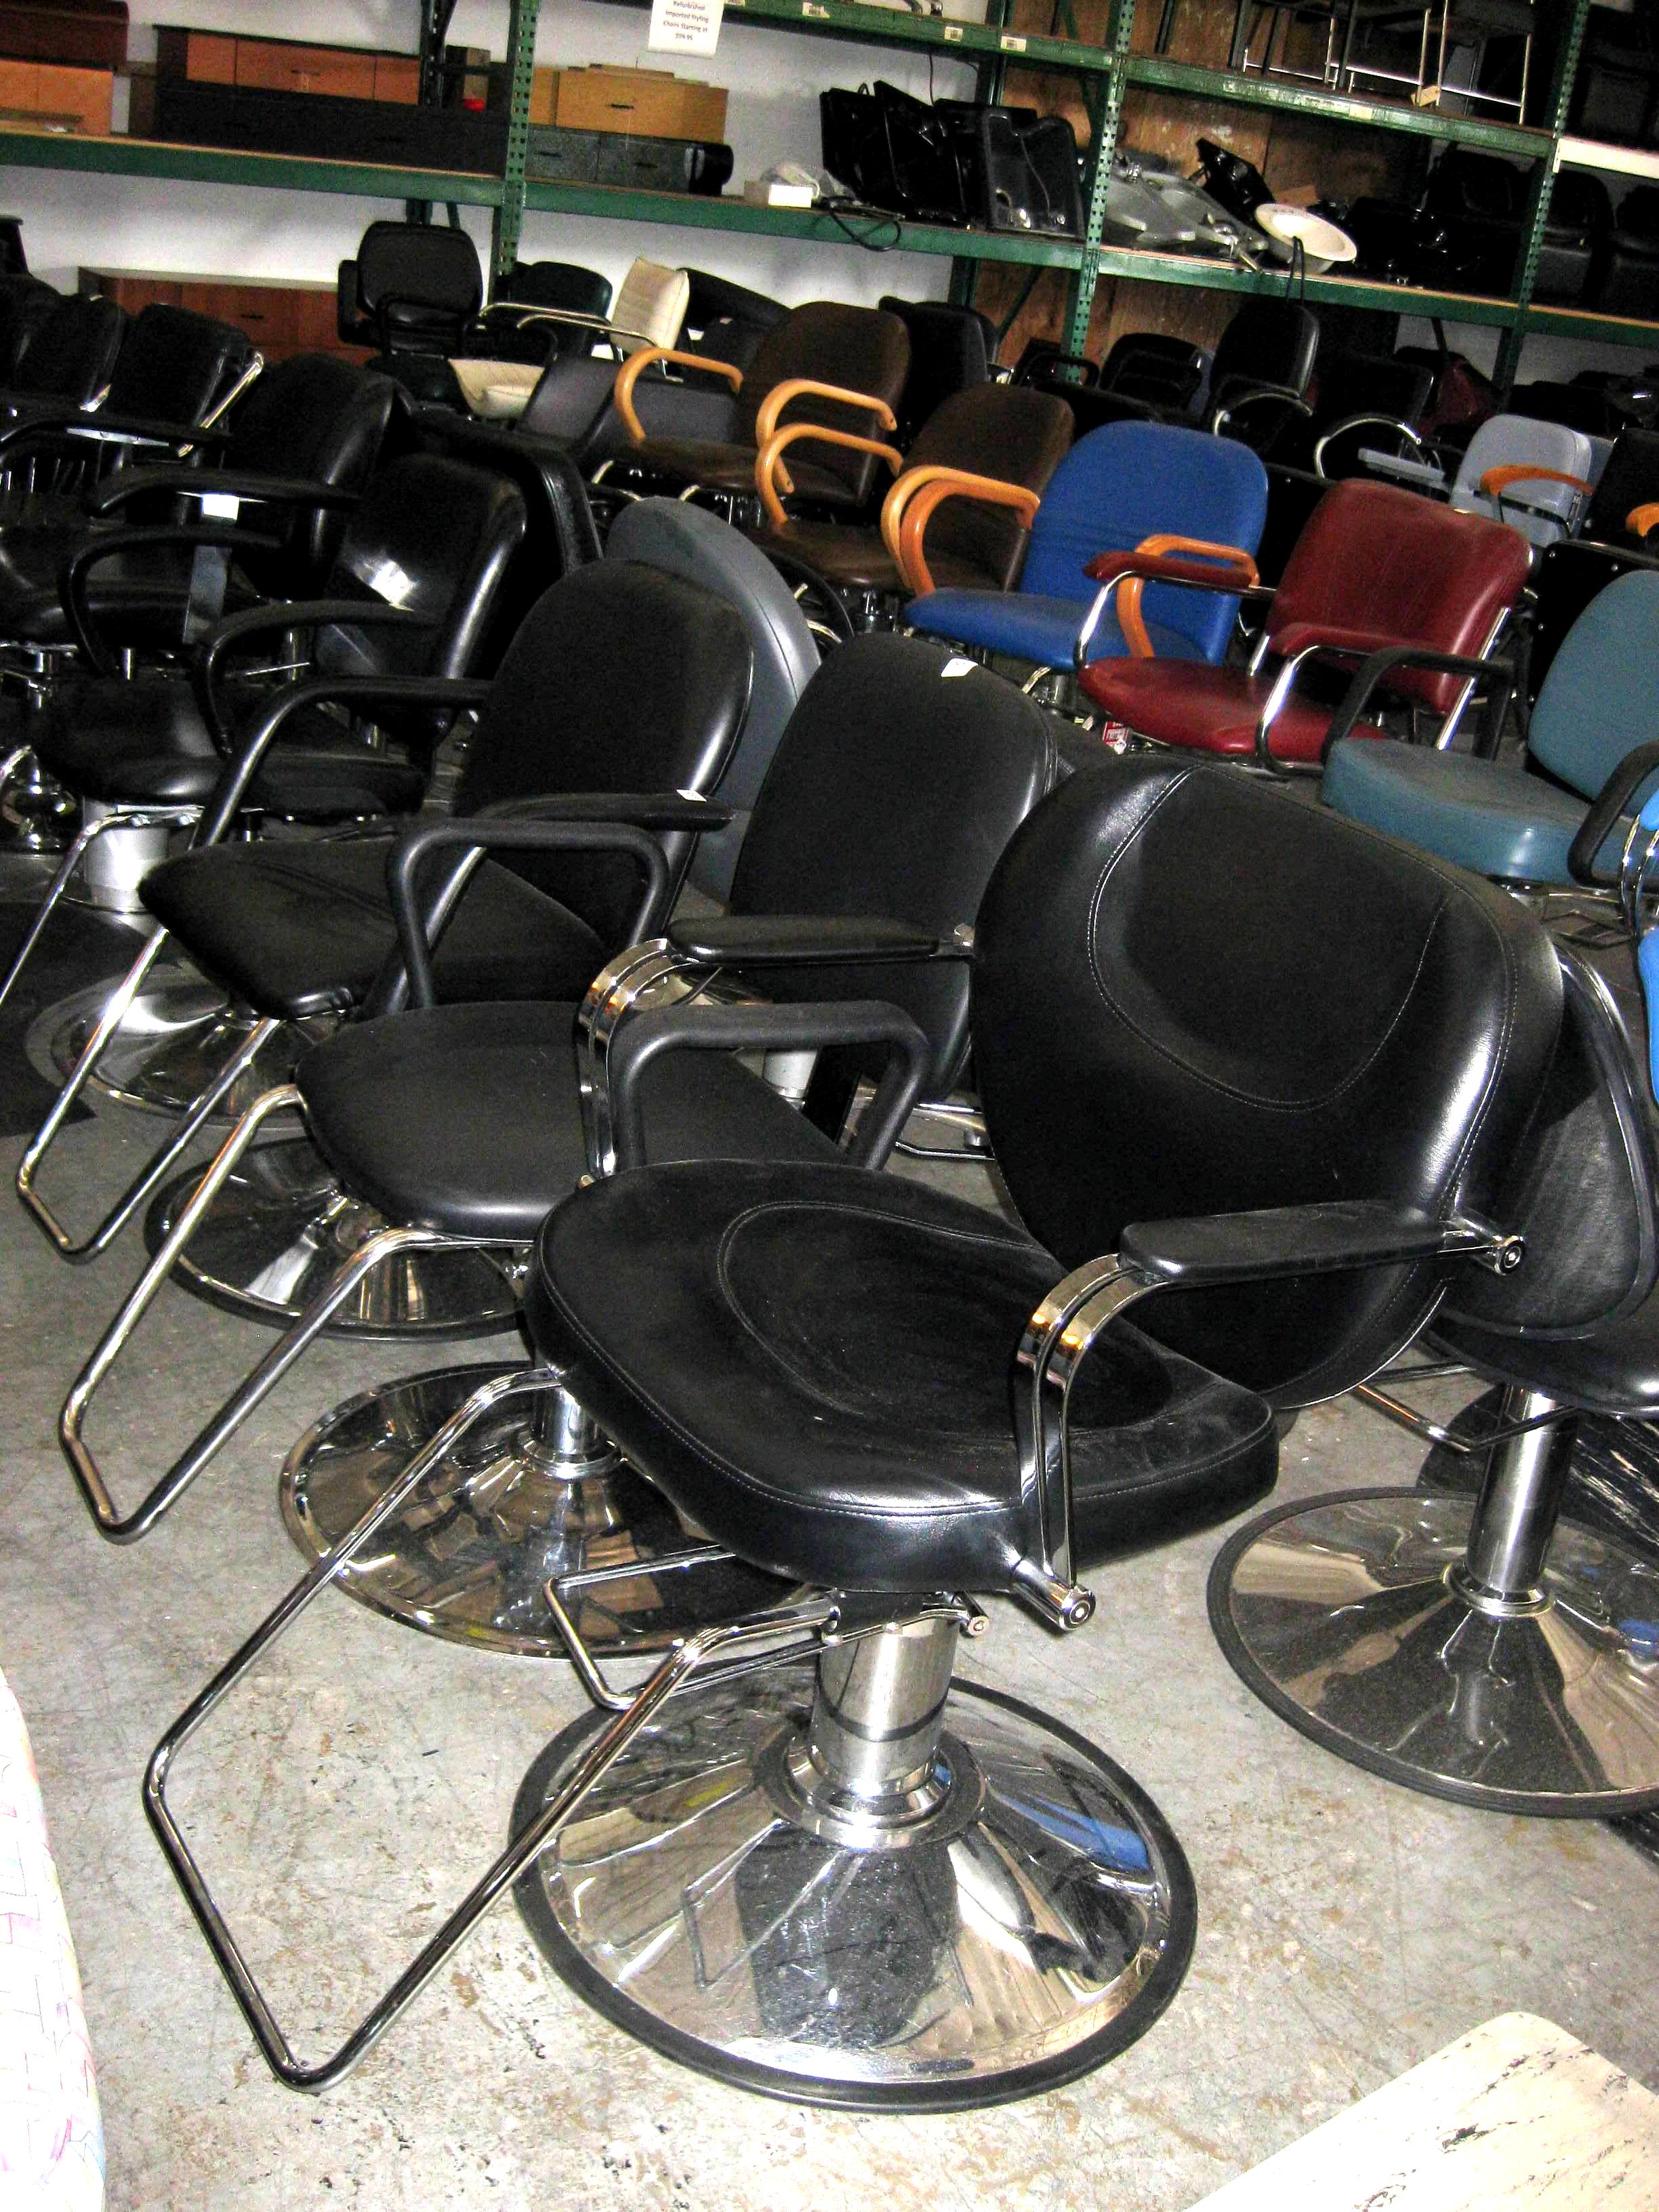 styling chairs